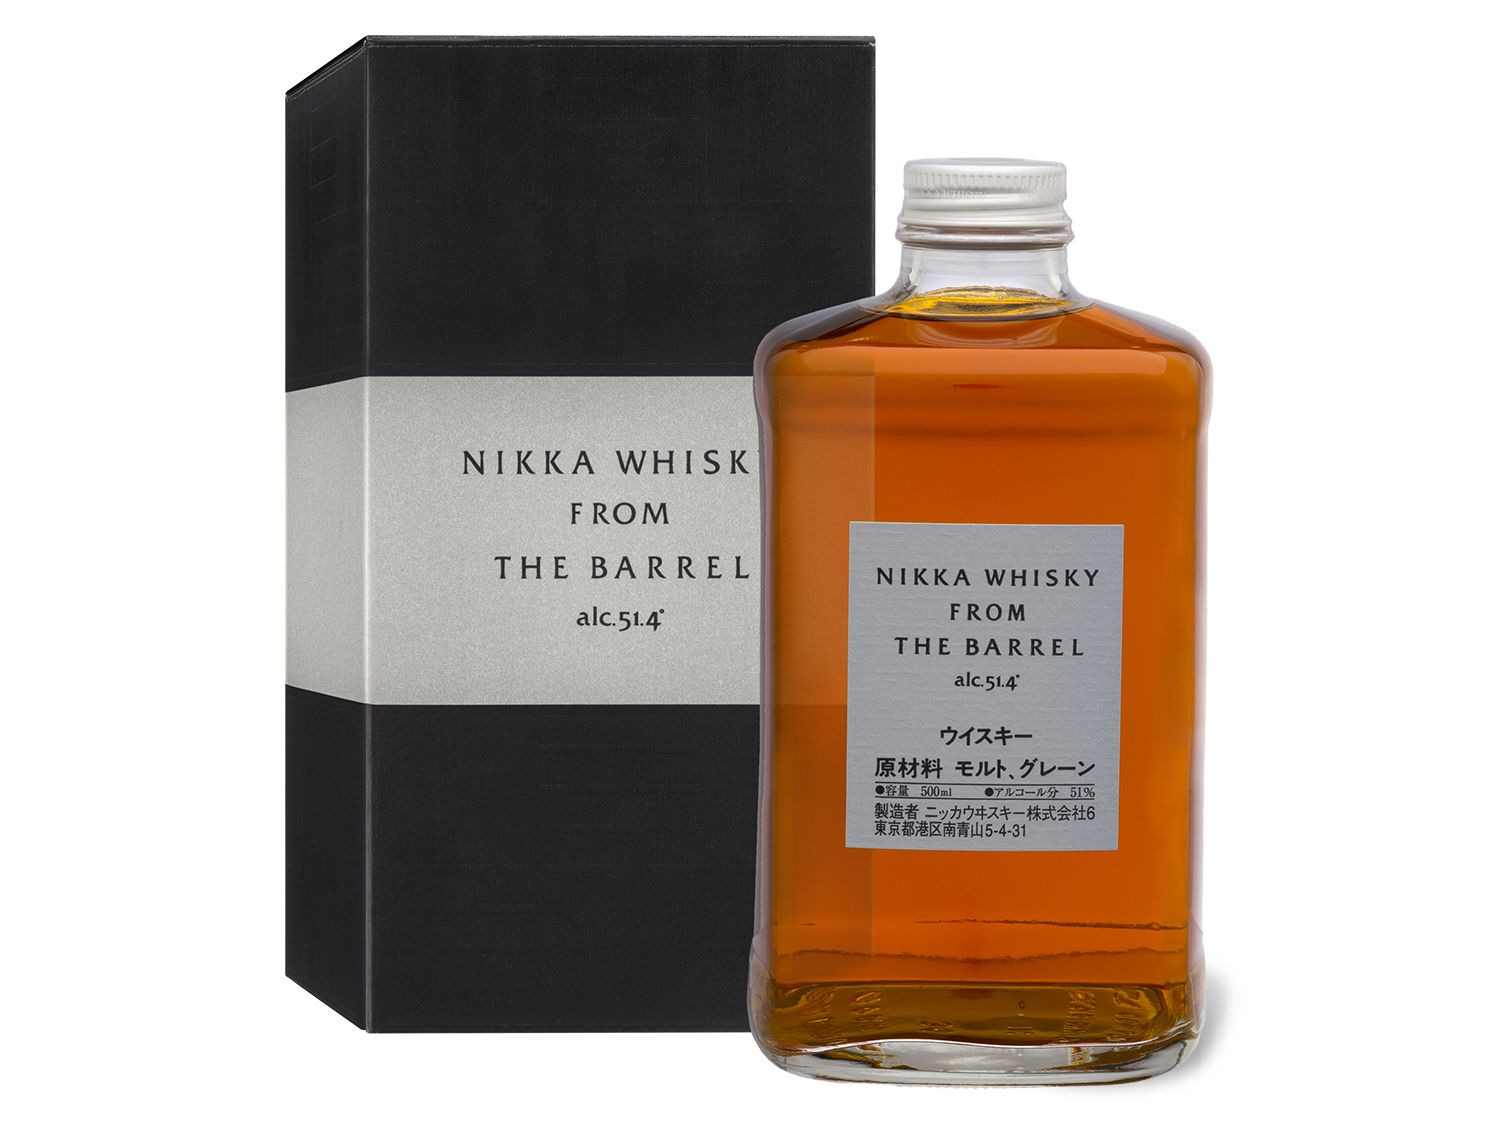 NIKKA Whisky from the Barrel 51 4% Vol